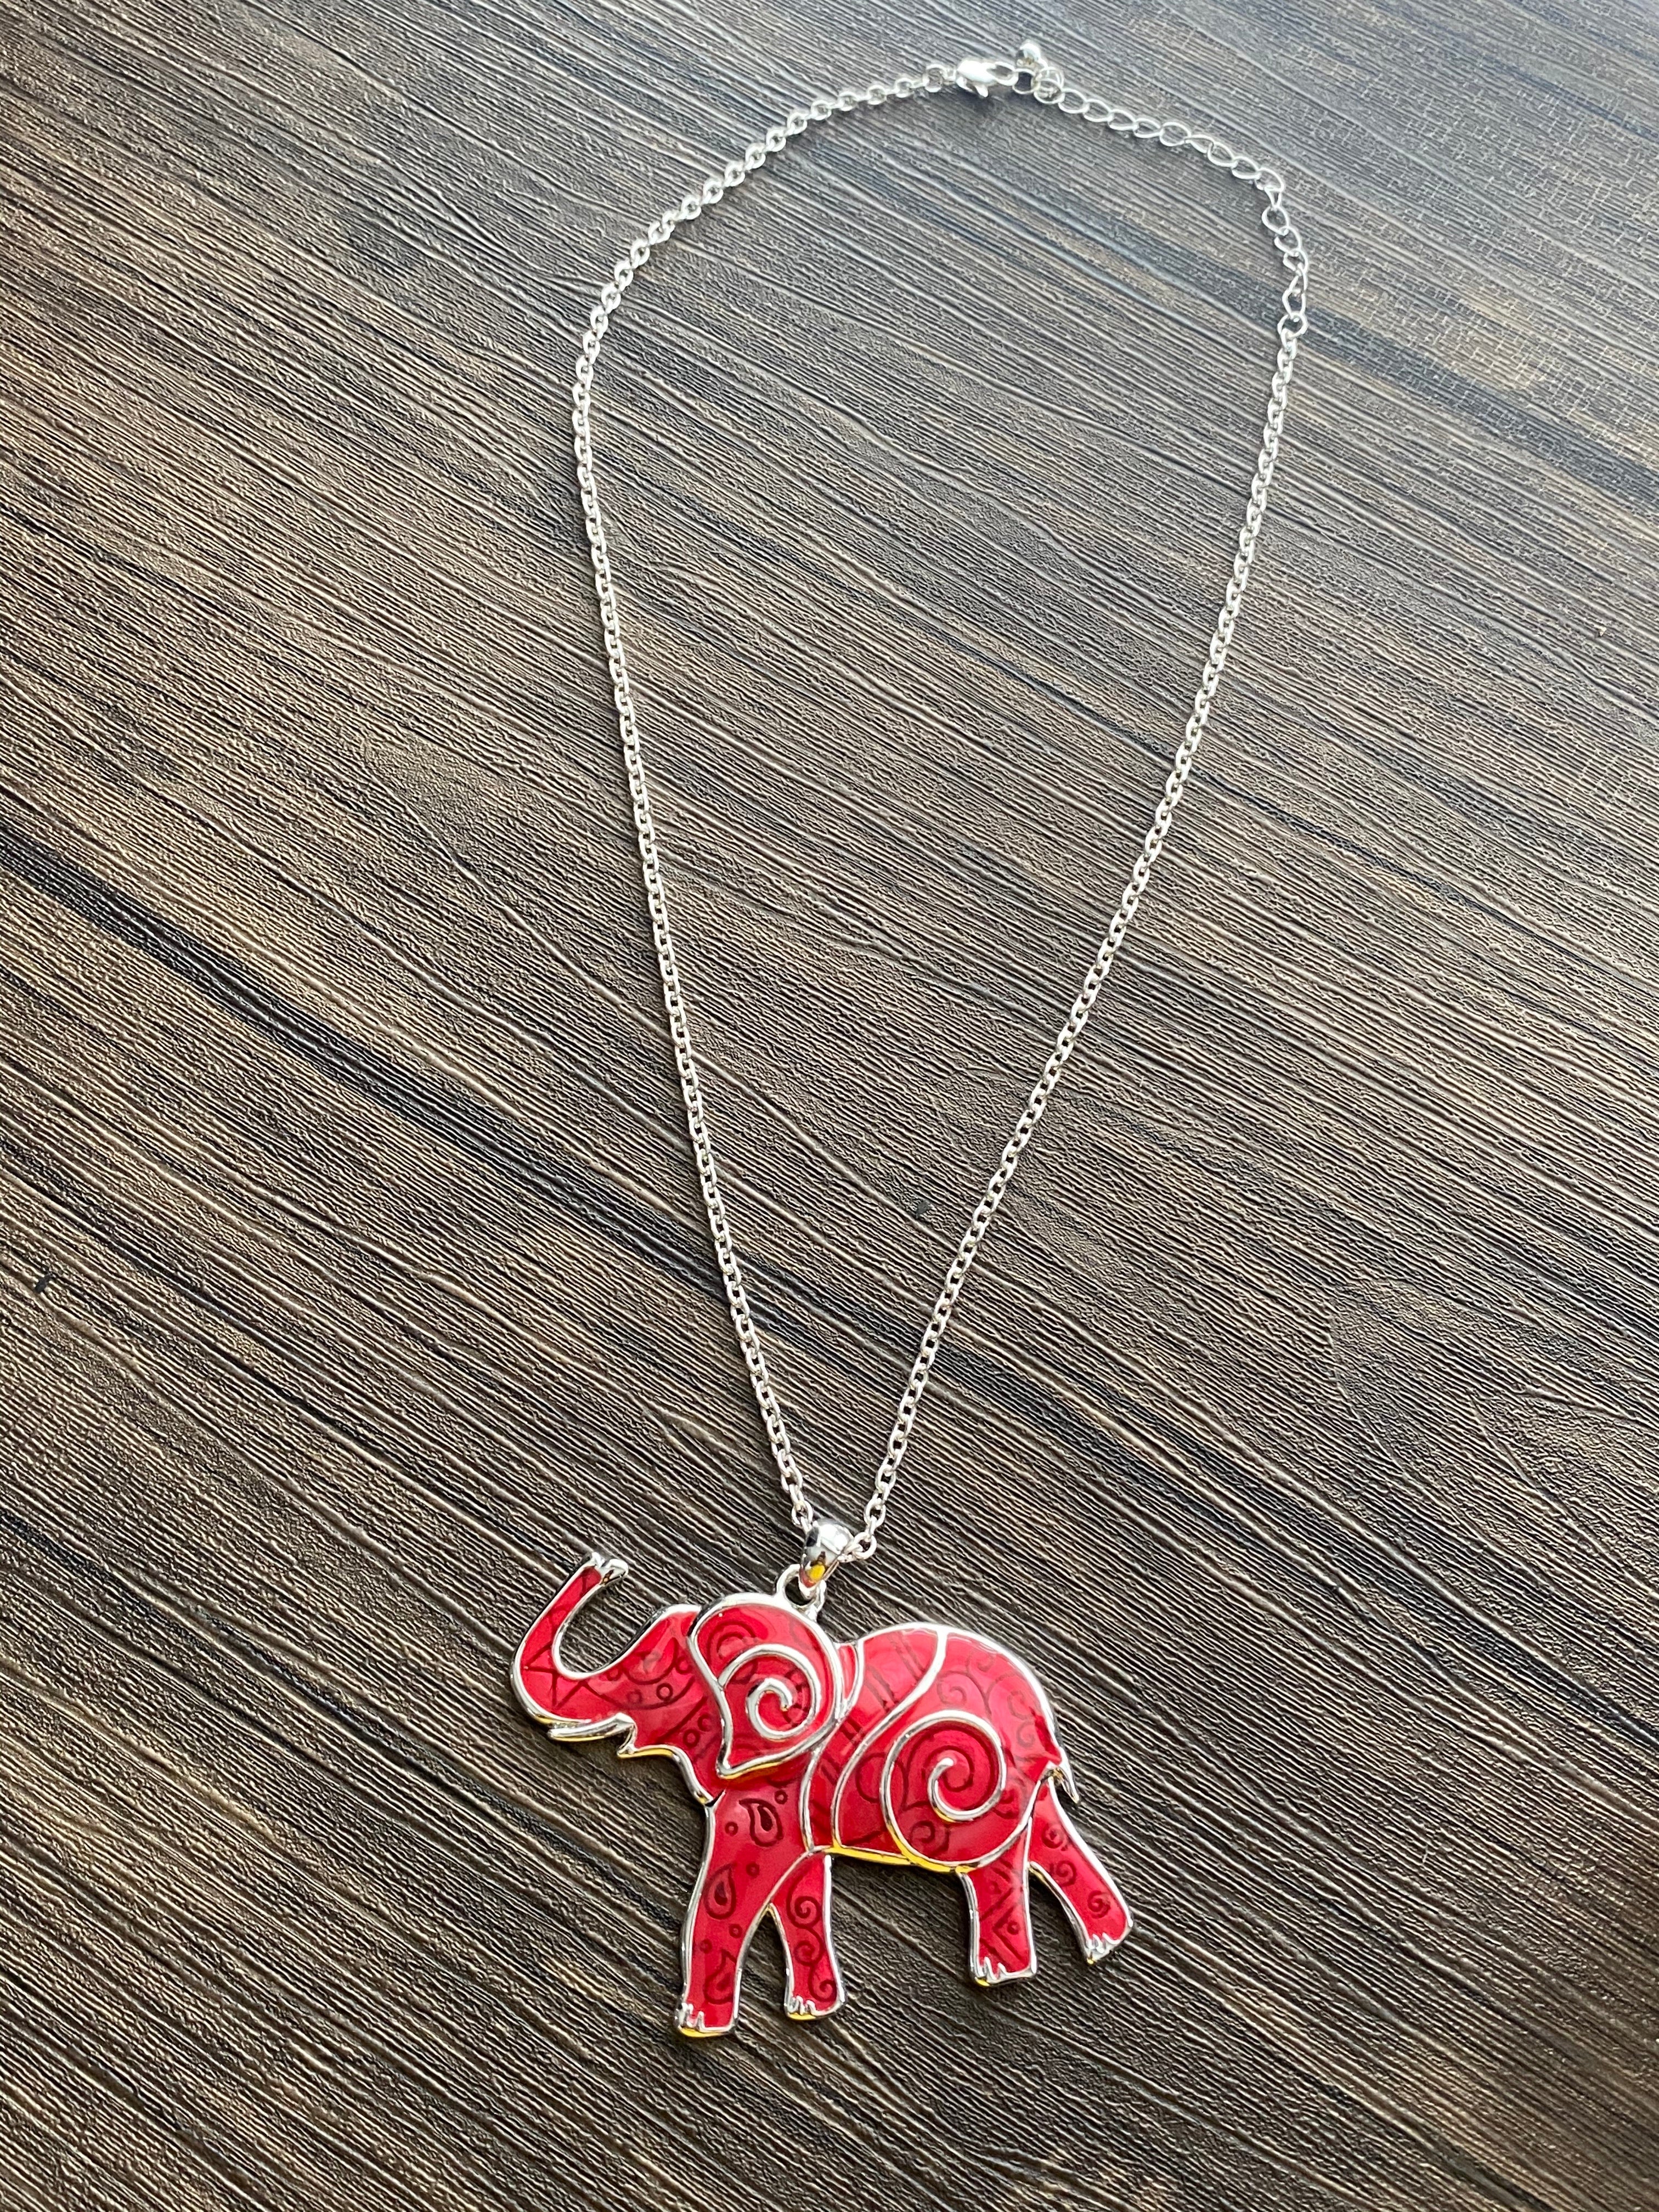 Red and Silver Contemporary Elephant